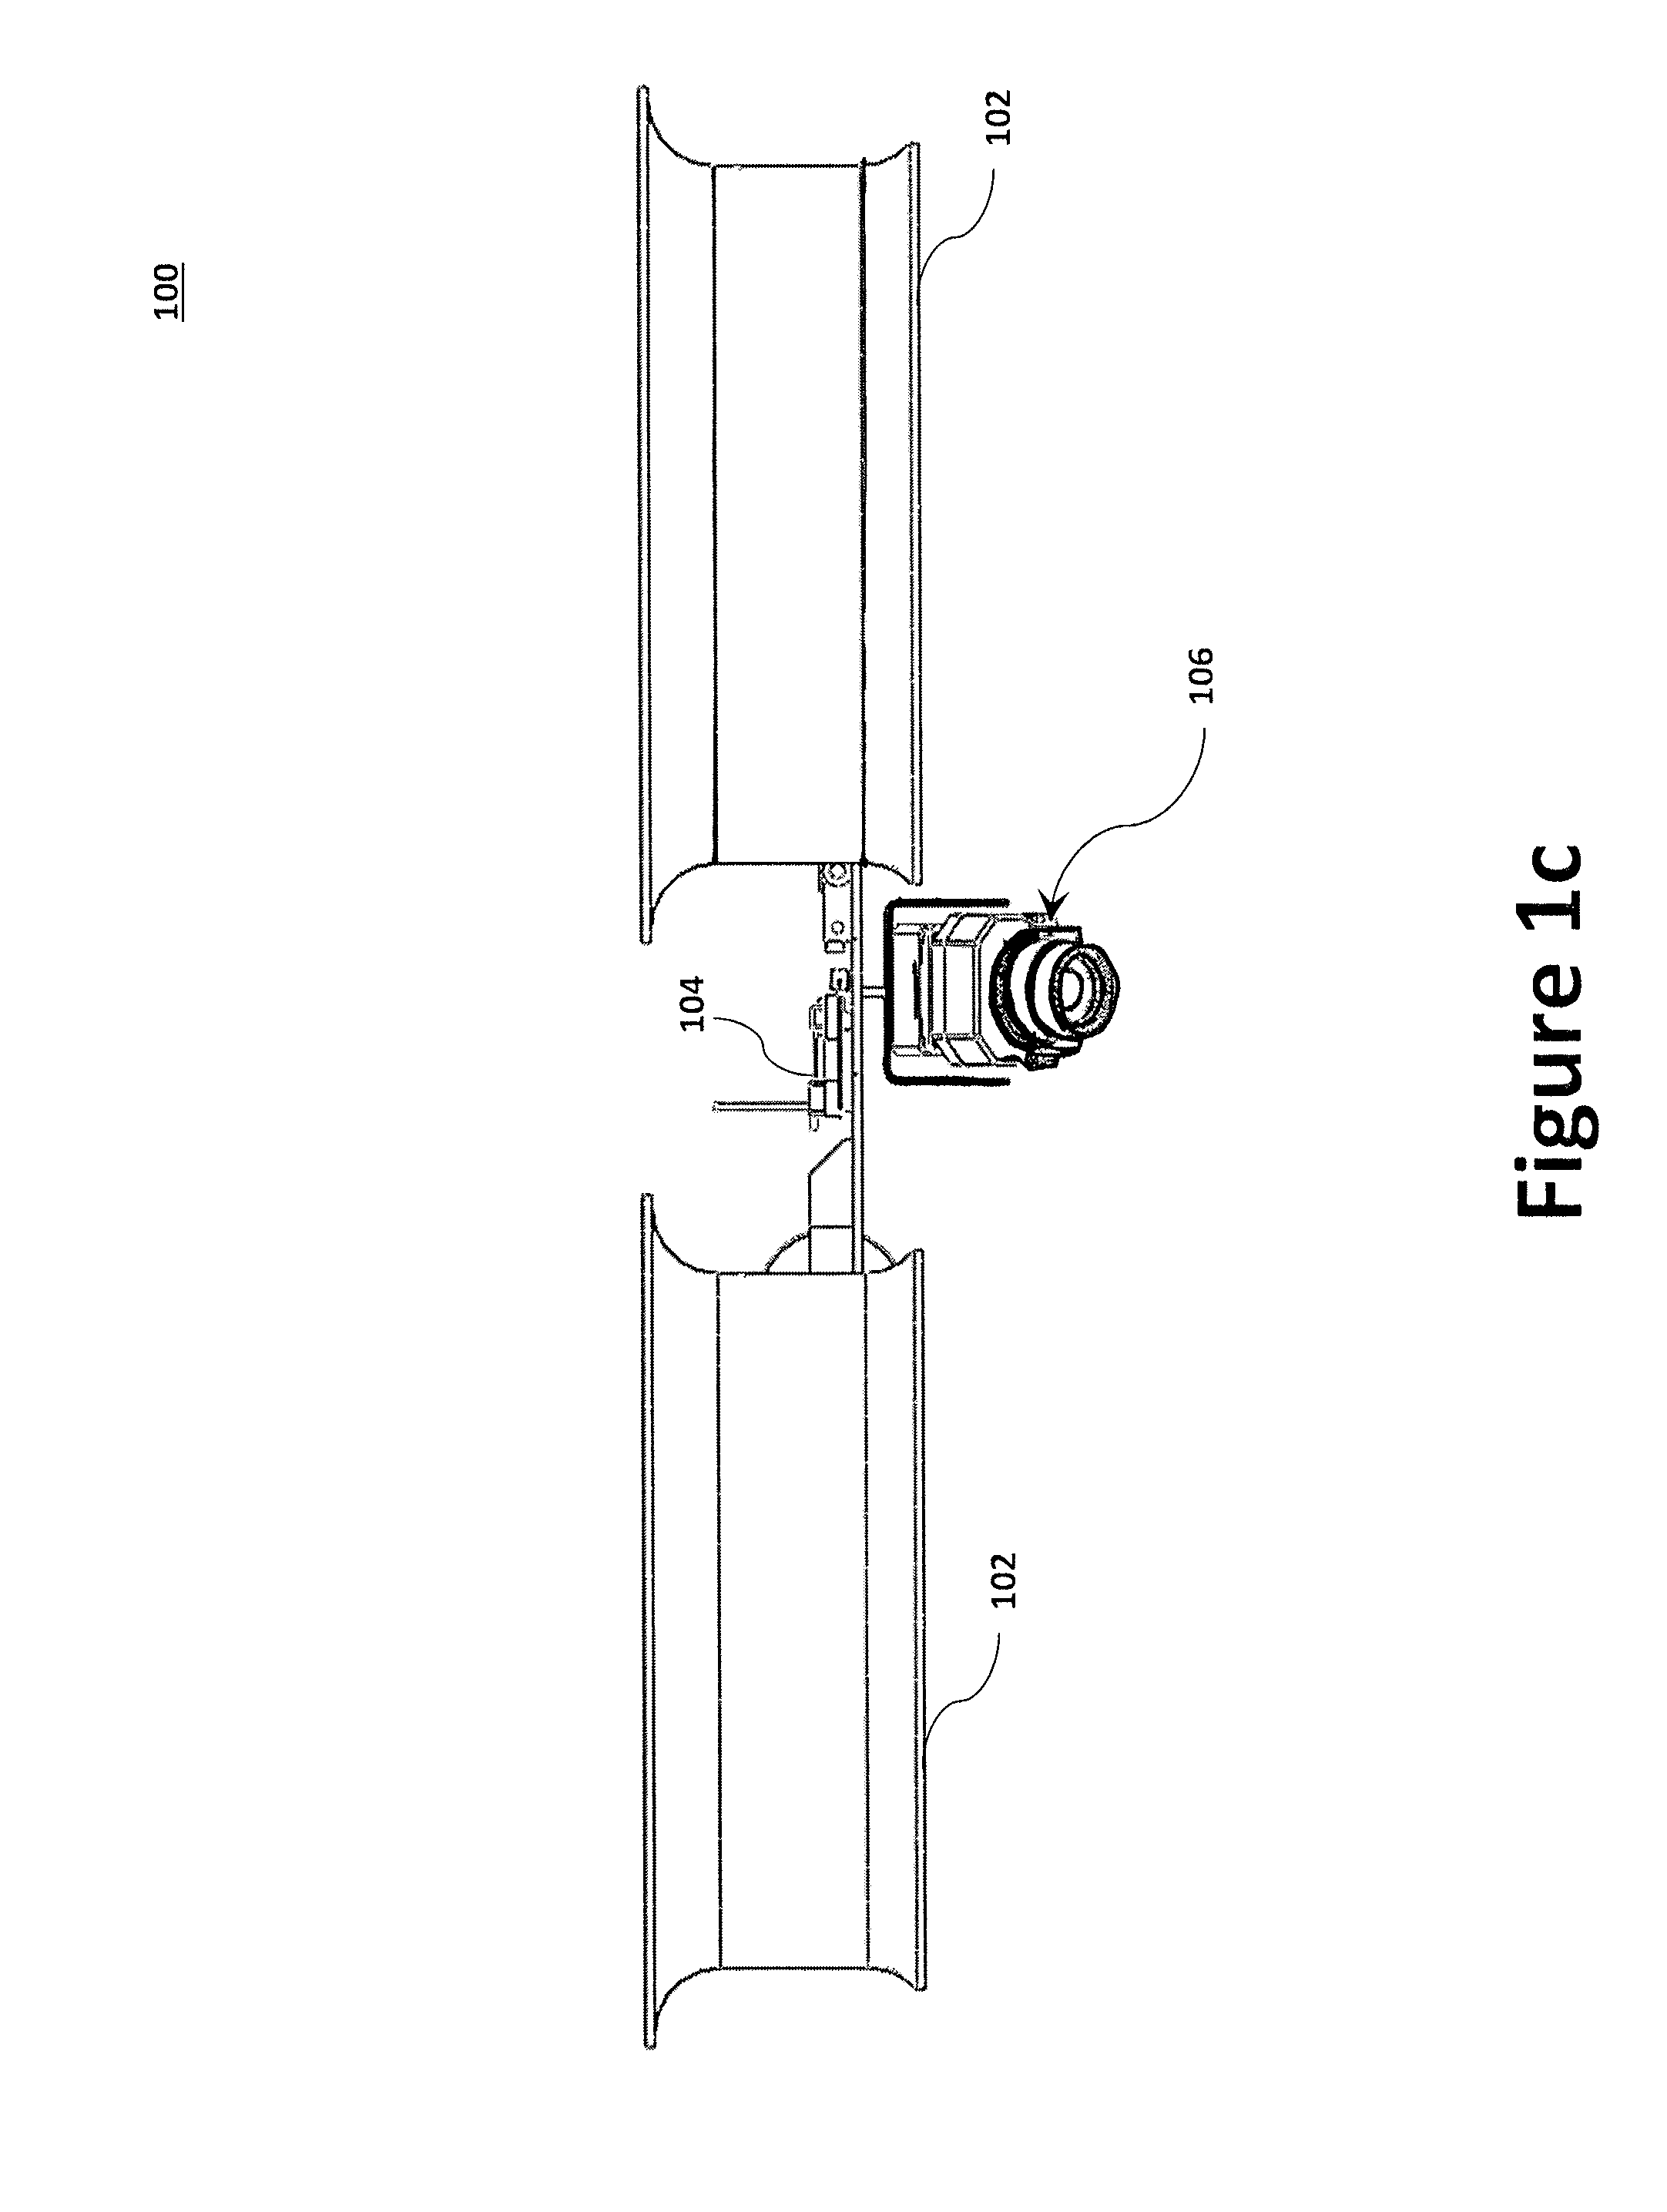 Tethered aerial systems for data gathering